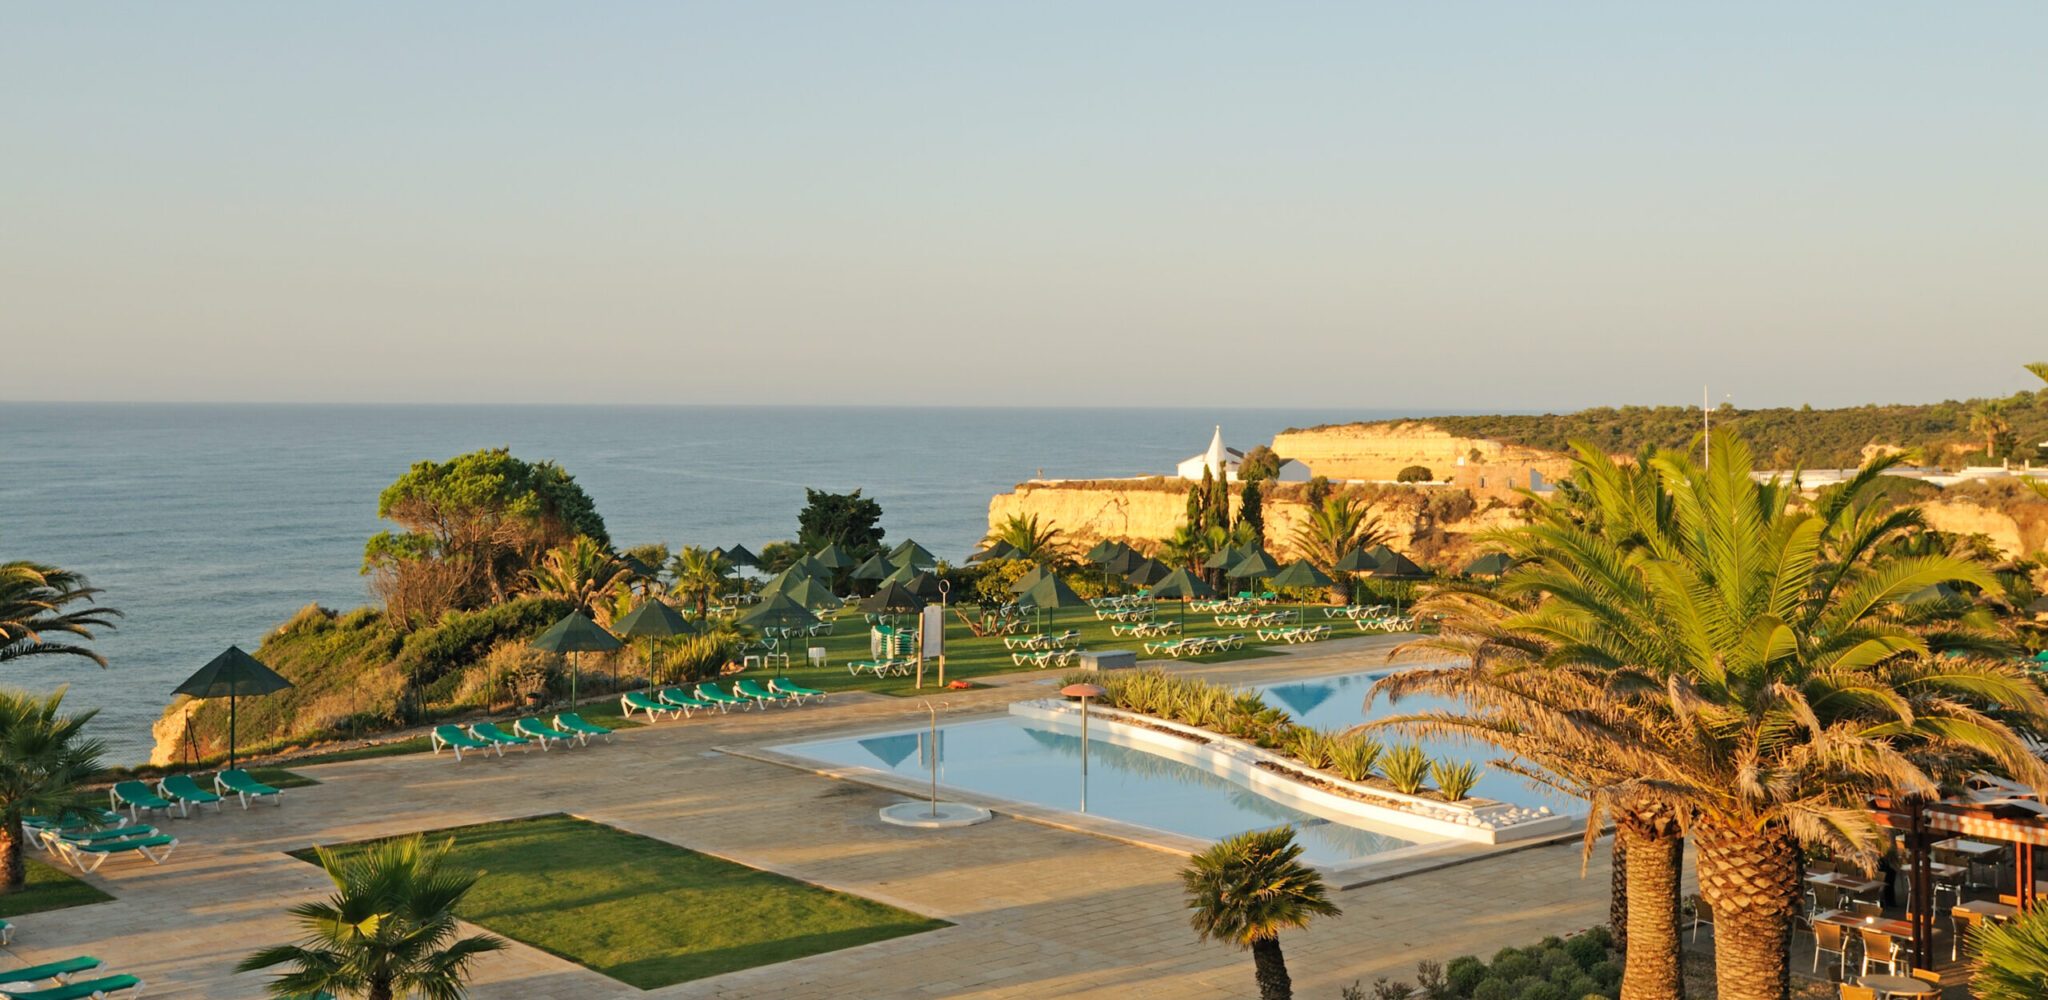 A scenic view out to seas, across the Pestana Viking gardens. A fantastic place for your next golf break.